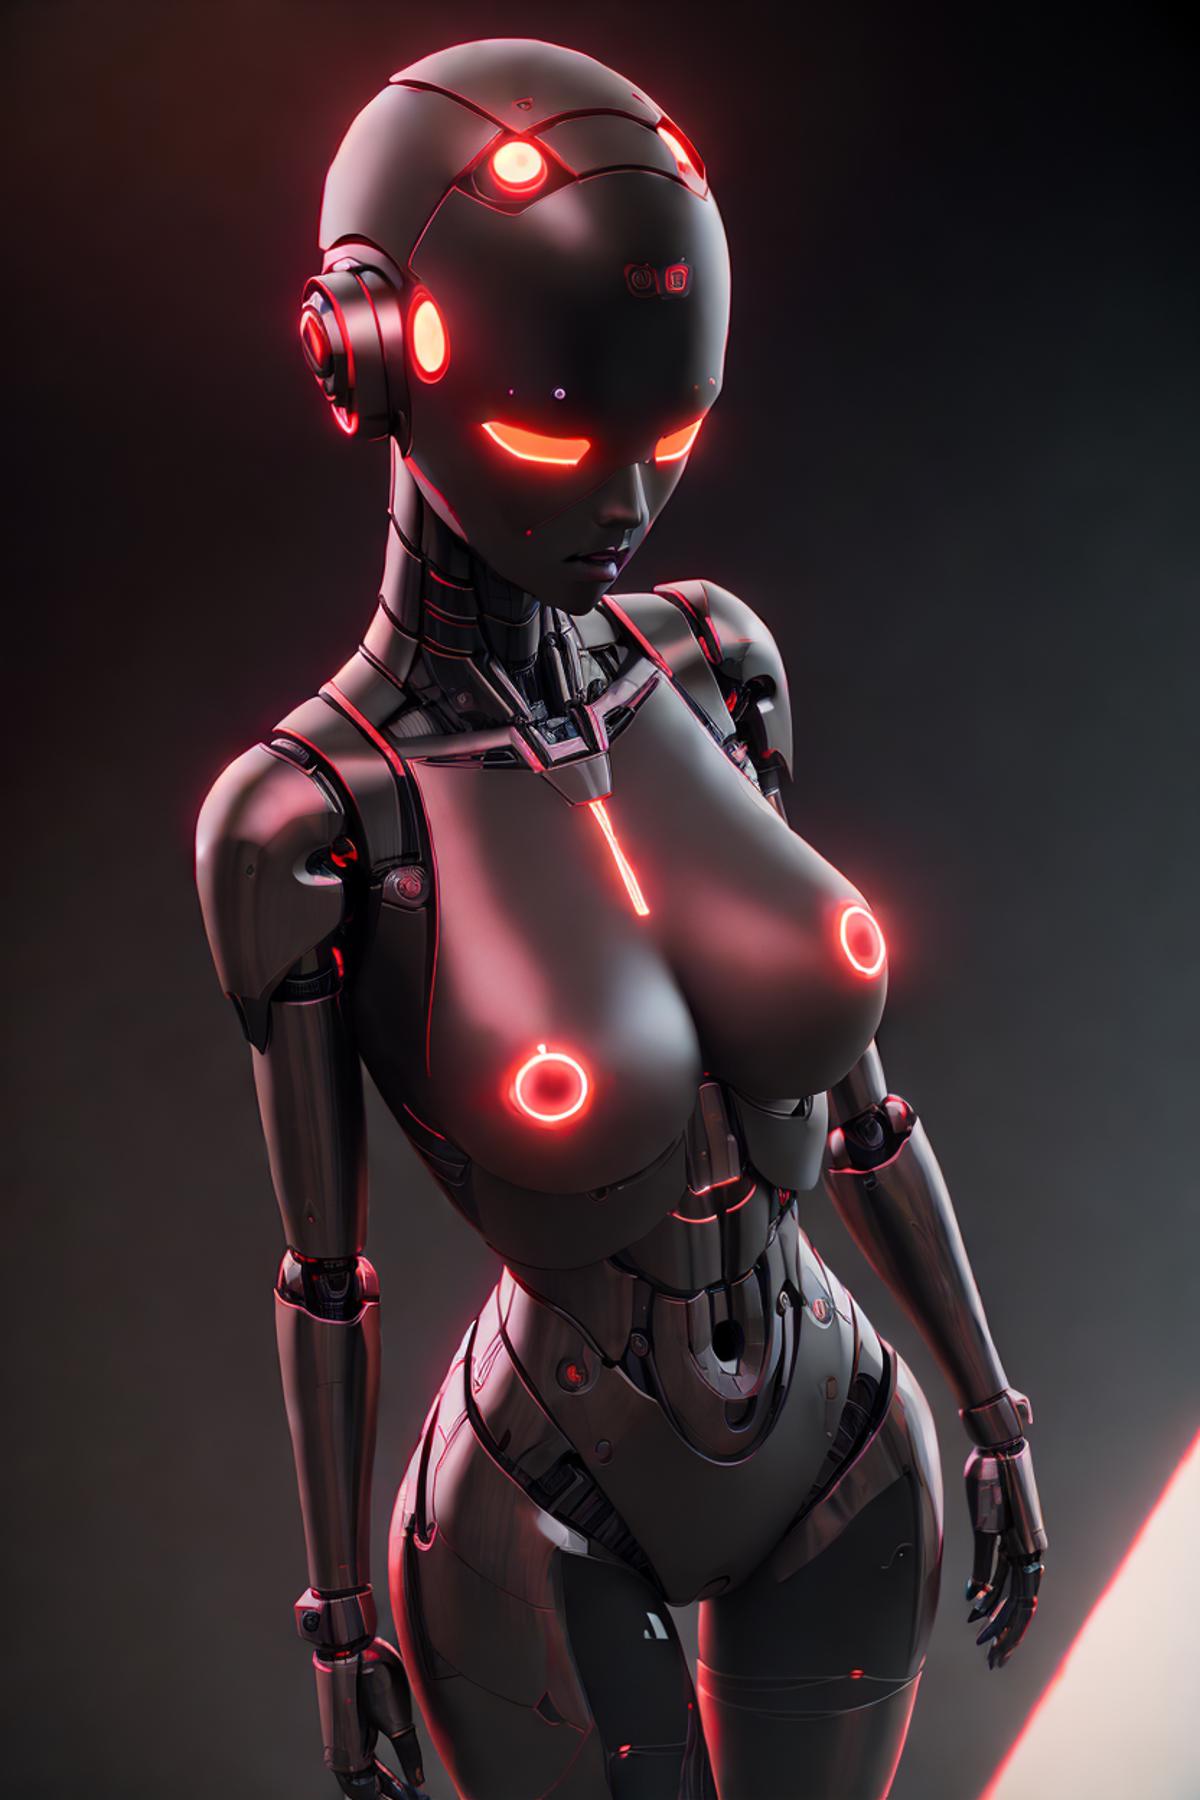 AI model image by test157t668